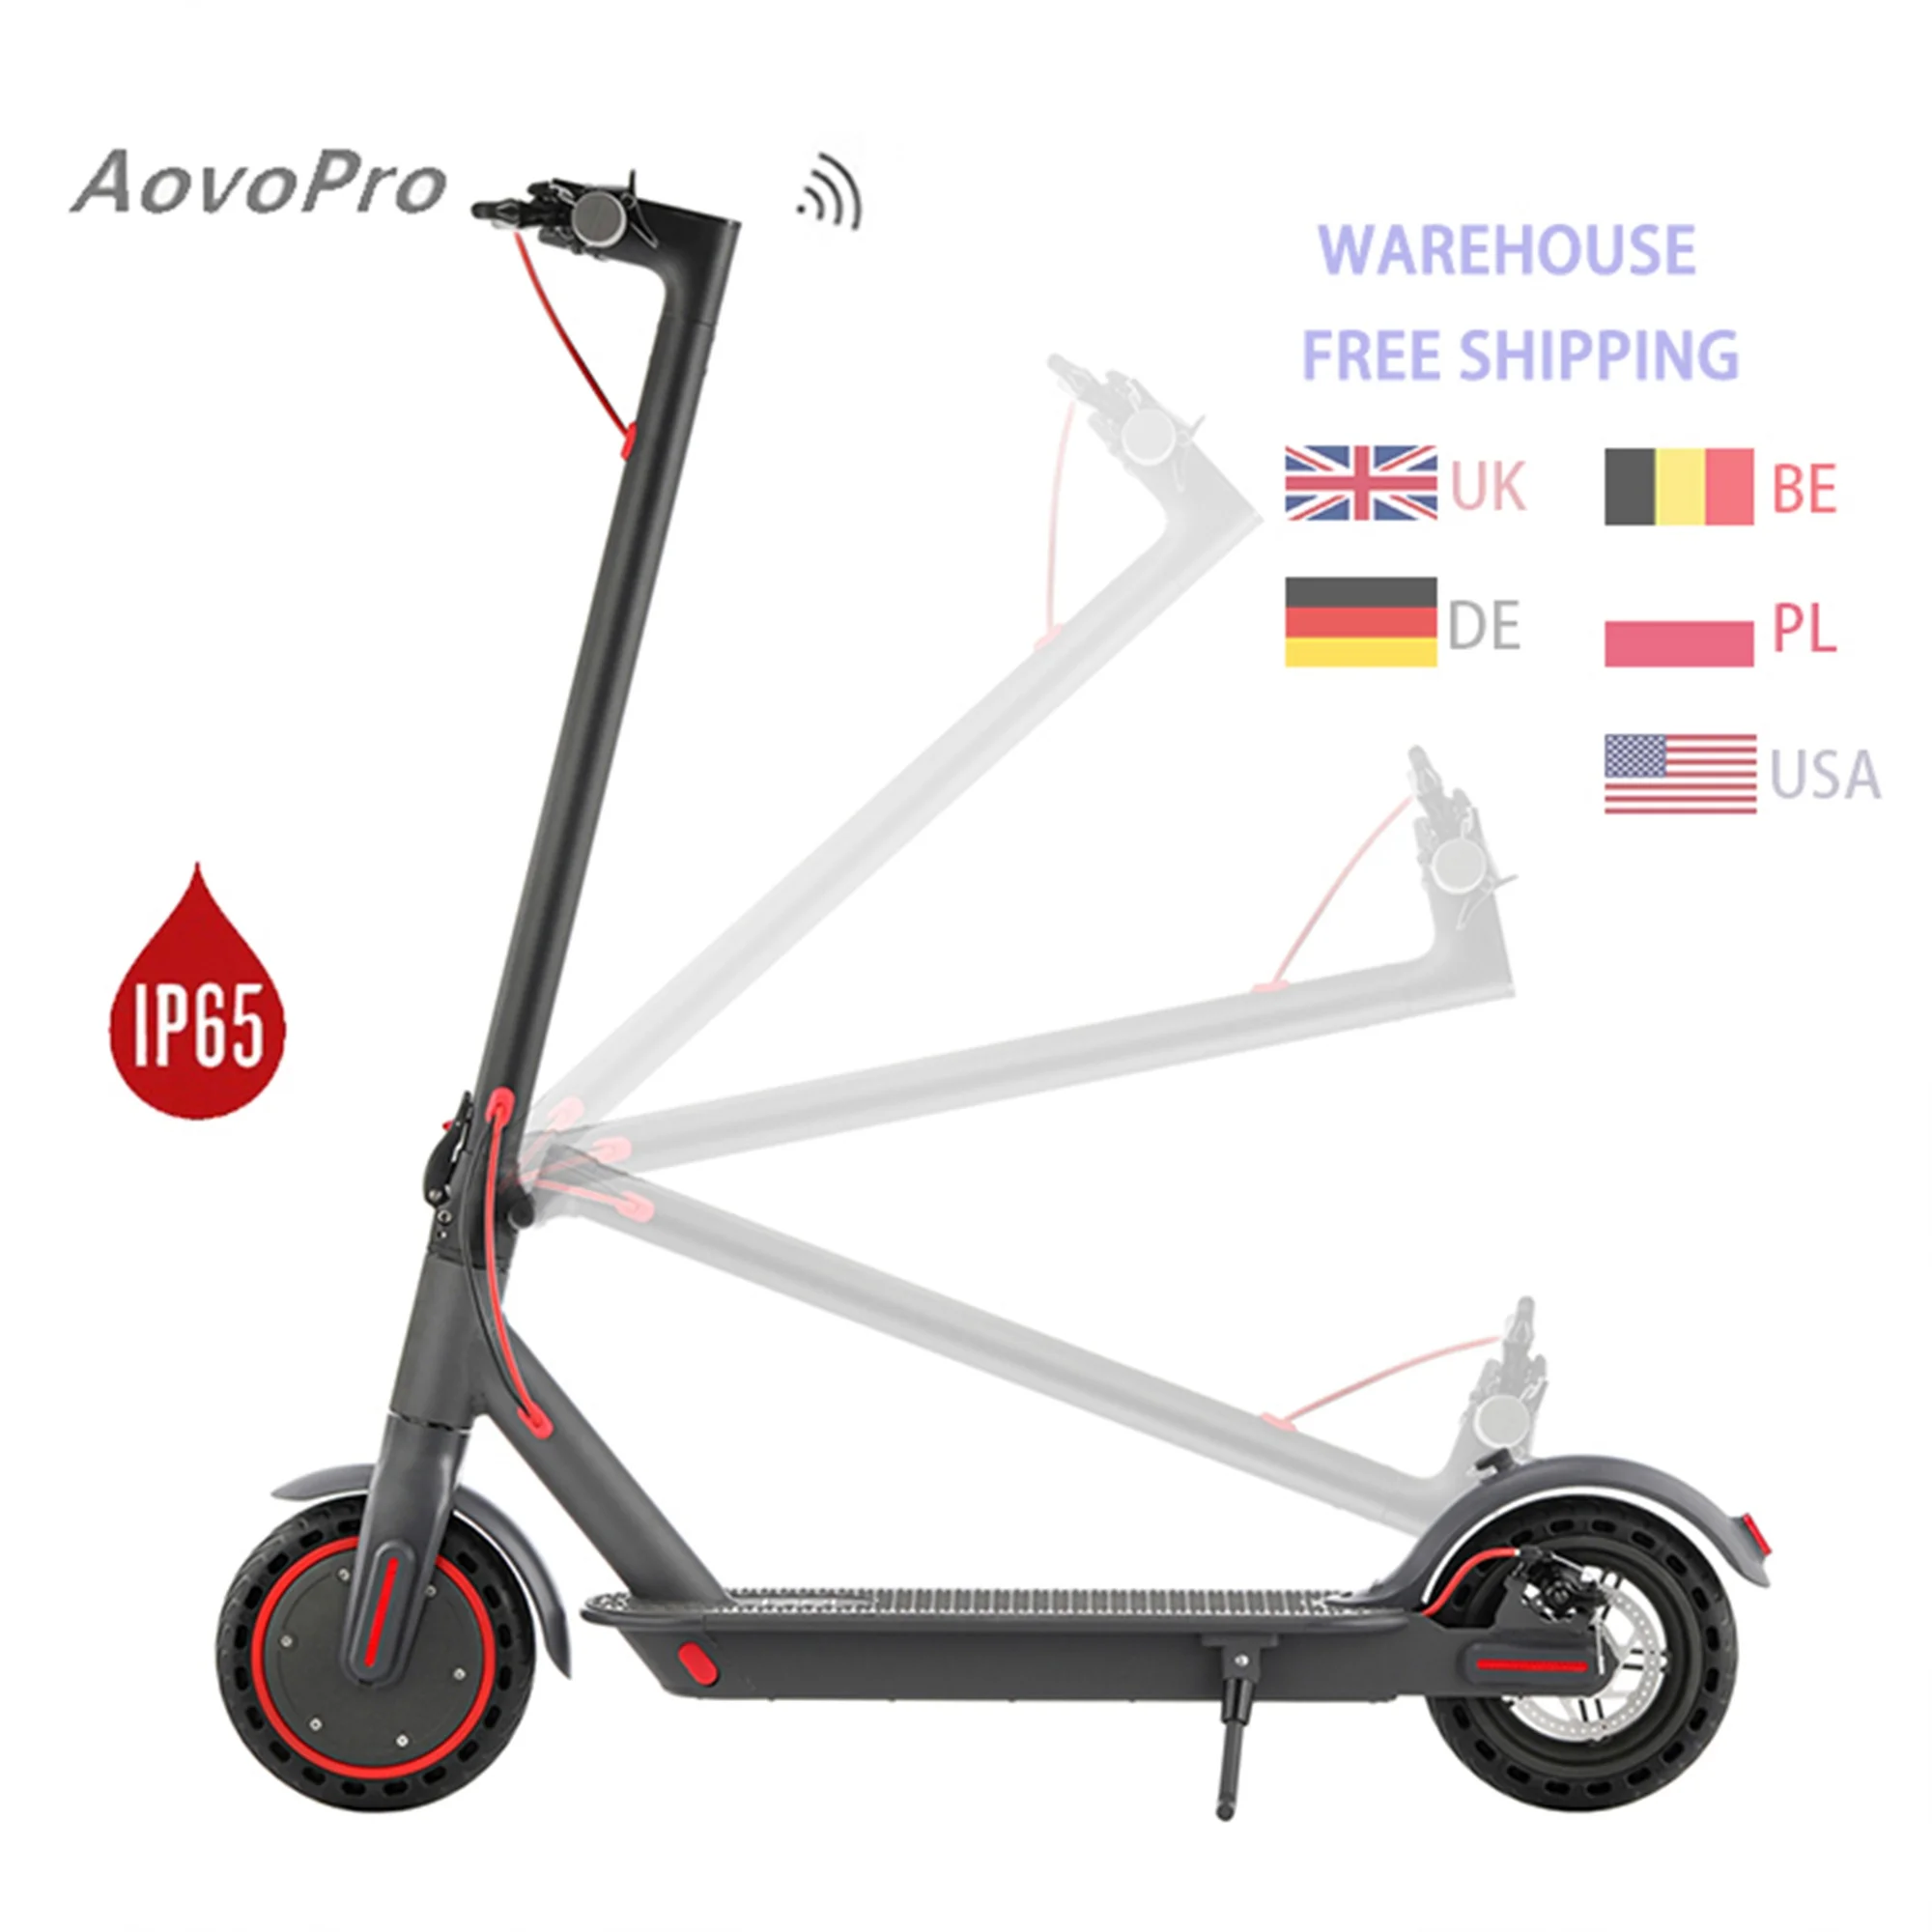 

AOVO M365 Pro Portable Electric Scooter Motorcycle eu warehouse 25km h 350w 36v Adult E Electric Scooter Foldable